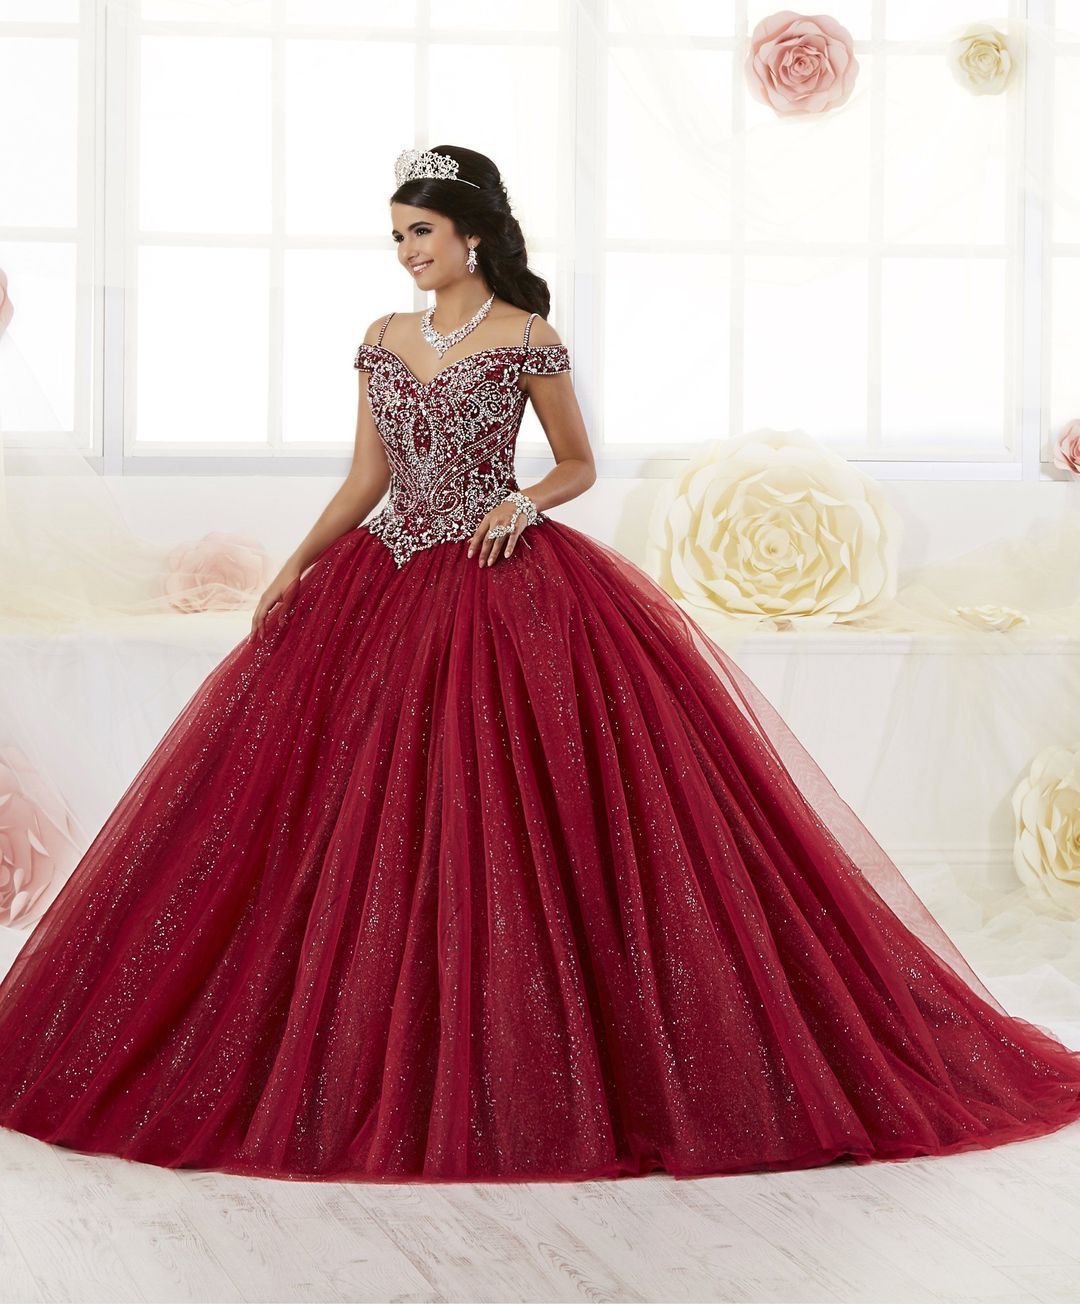 Beaded Off the Shoulder Quinceanera Dress by House of Wu 26899 -   15 dress Quinceanera burgundy ideas